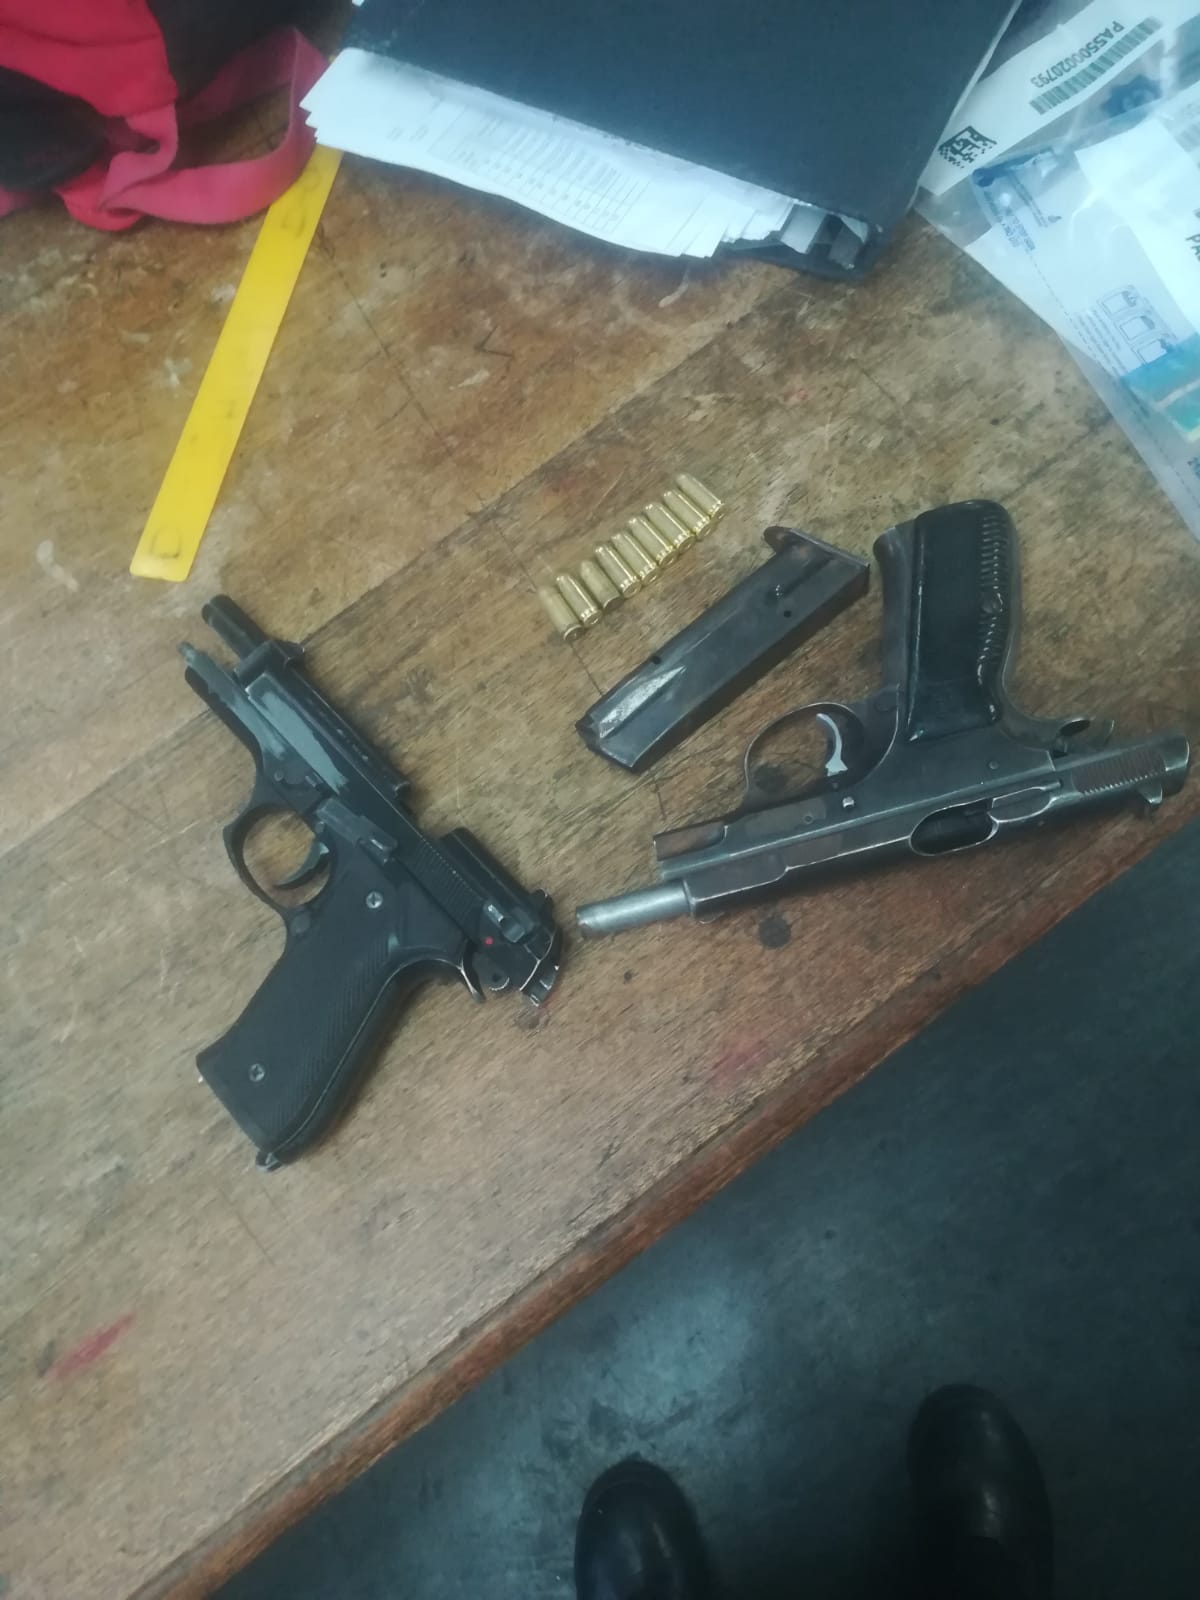 Suspect arrested with prohibited firearms in Samora Machel, another one arrested in Kuils Rivier with a stolen firearm